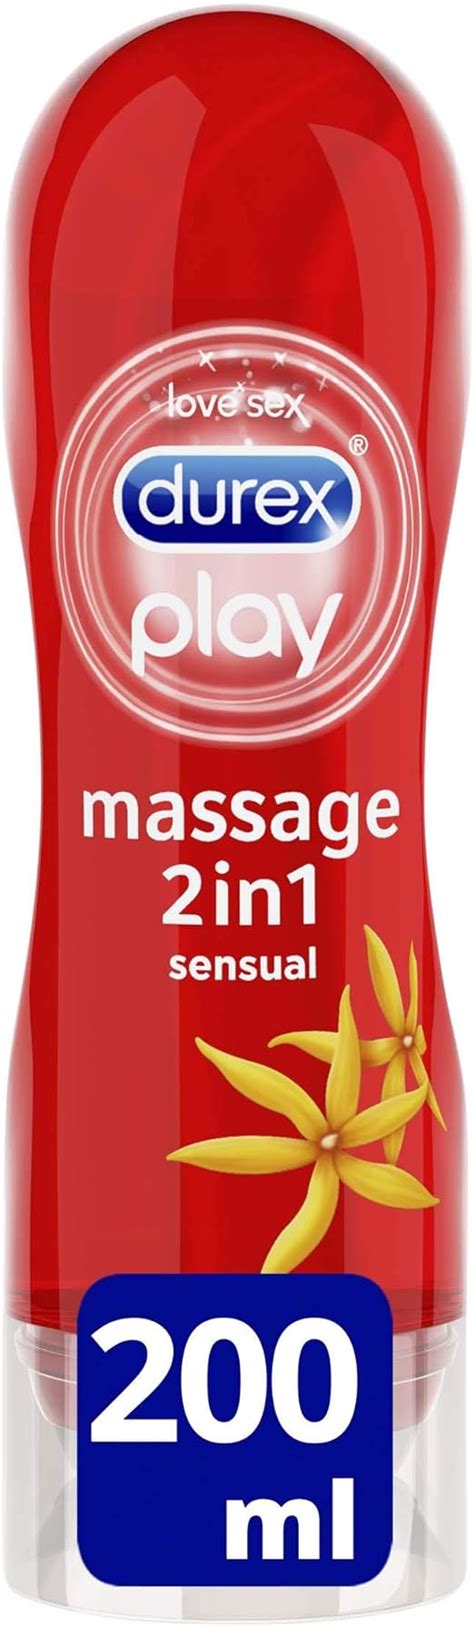 Durex Massage Lube 2 In 1 Sensual Lubricant Gel With Ylang Ylang 200